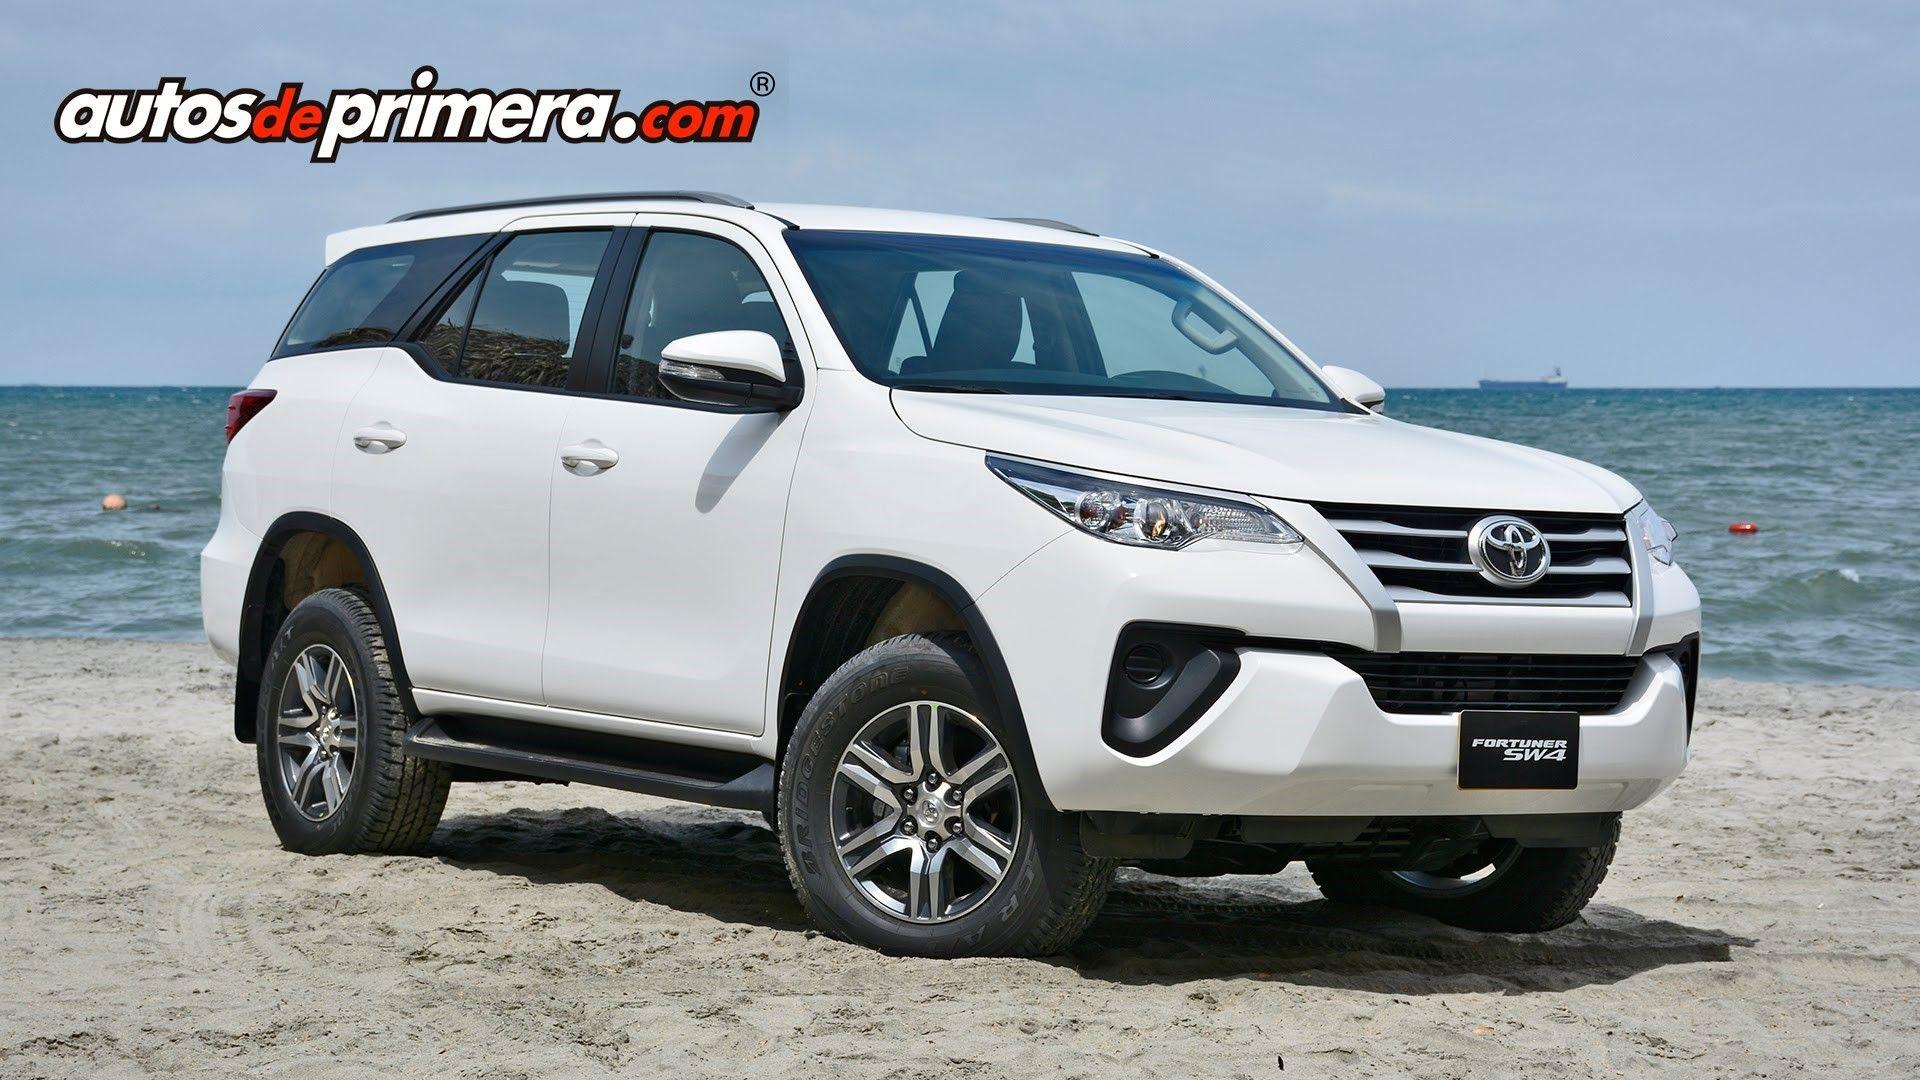 Toyota Toyota Fortuner fortuner wallpapers – Sustainable